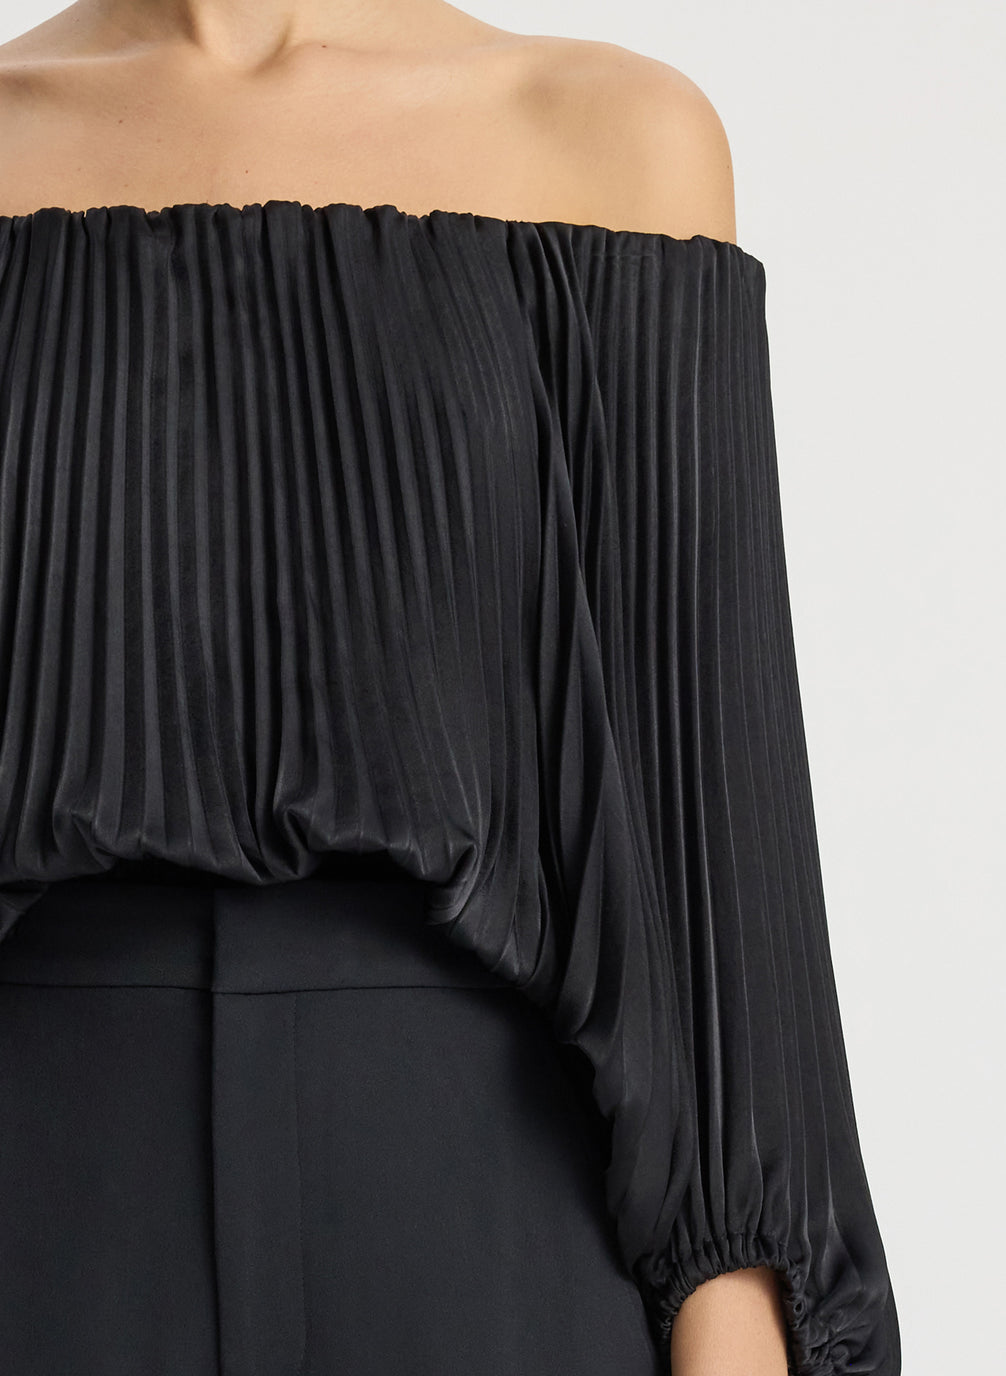 detail view of woman wearing black satin pleated off the shoulder top with black pants